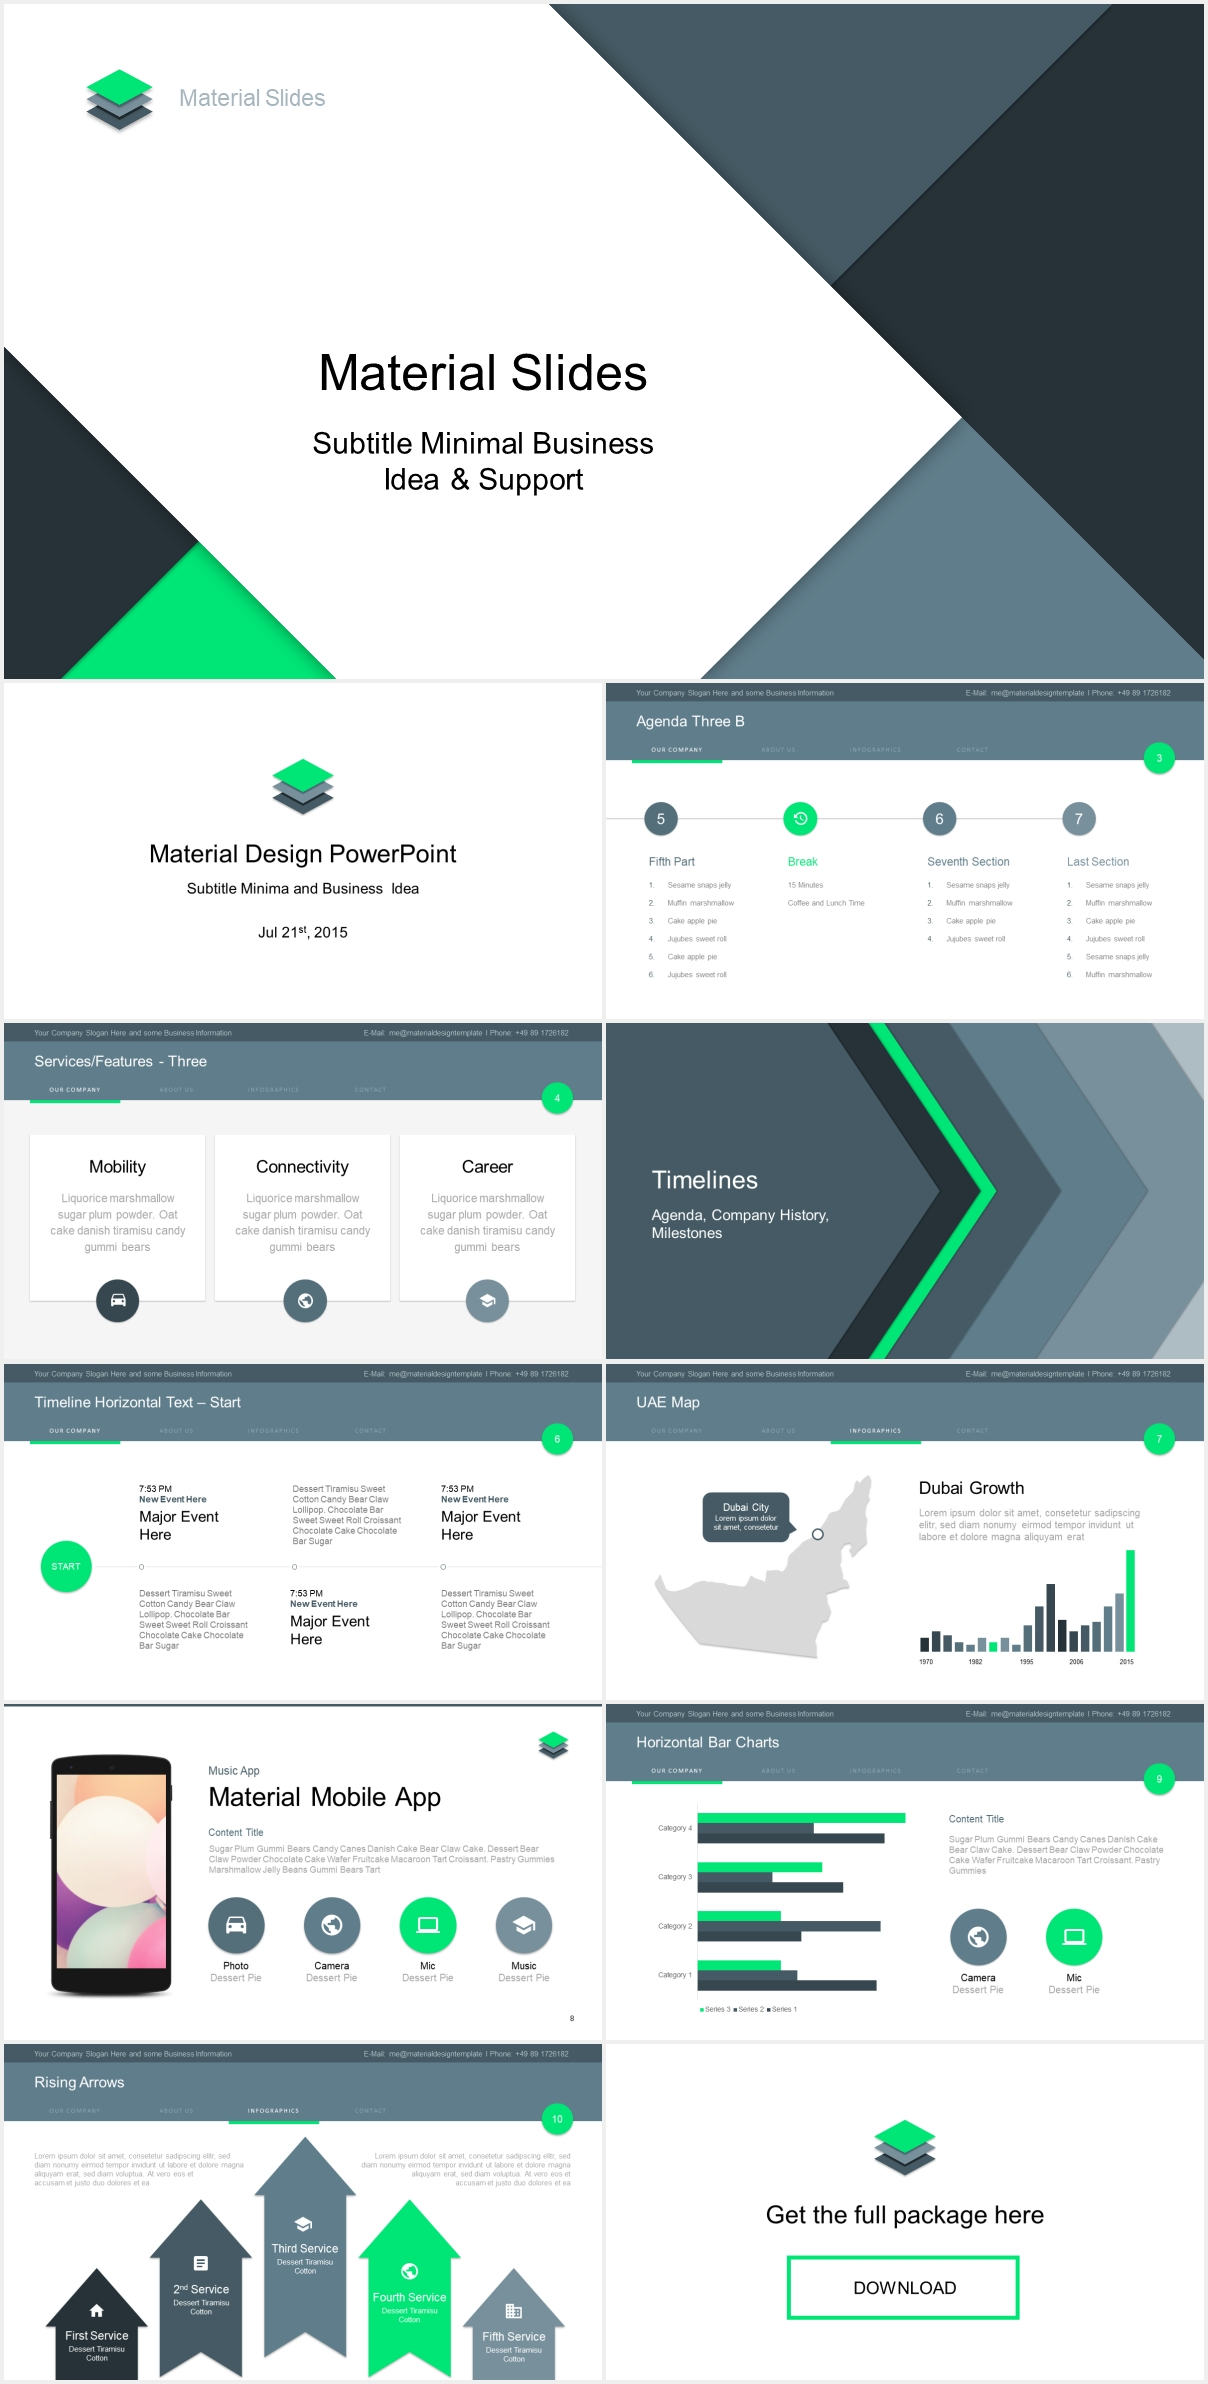 Material Design Powerpoint Template - Just Free Slides With Regard To Powerpoint 2007 Template Free Download